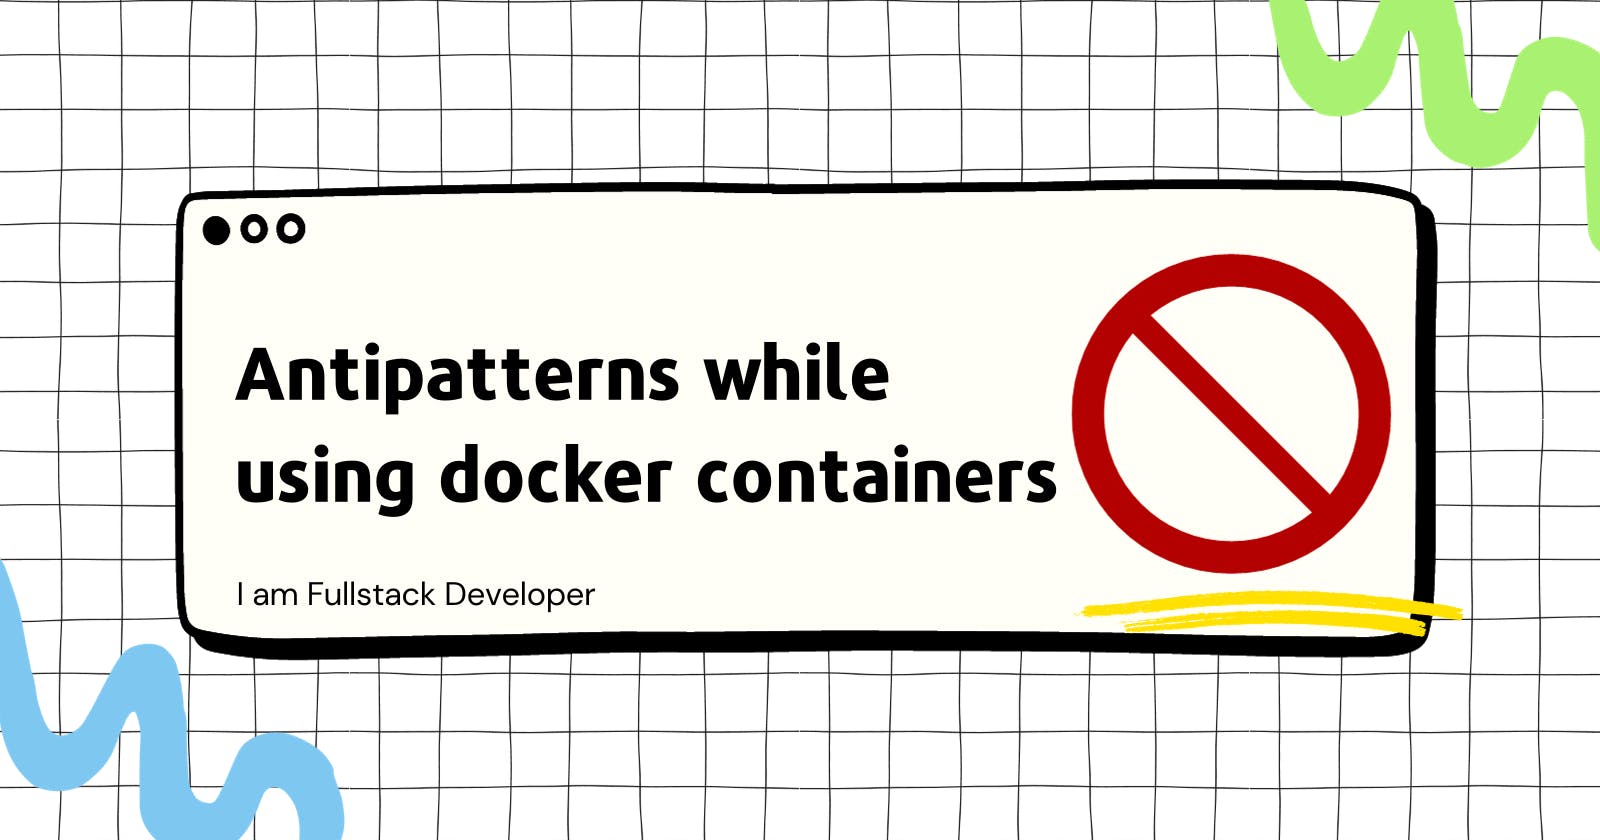 Antipatterns while using docker containers